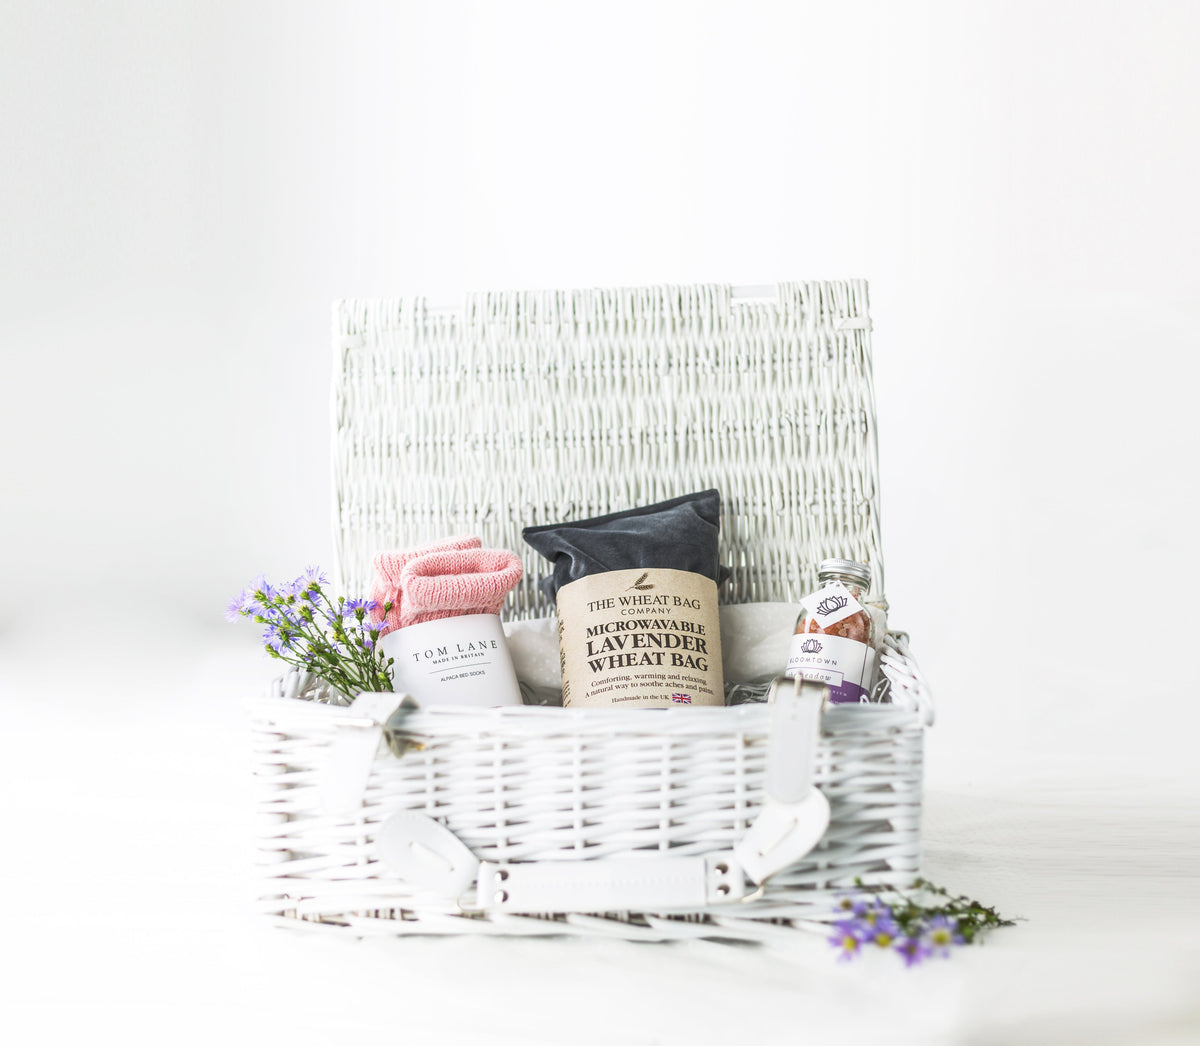 Card &amp; Hamper Basket or Box - THIS IS REQUIRED!